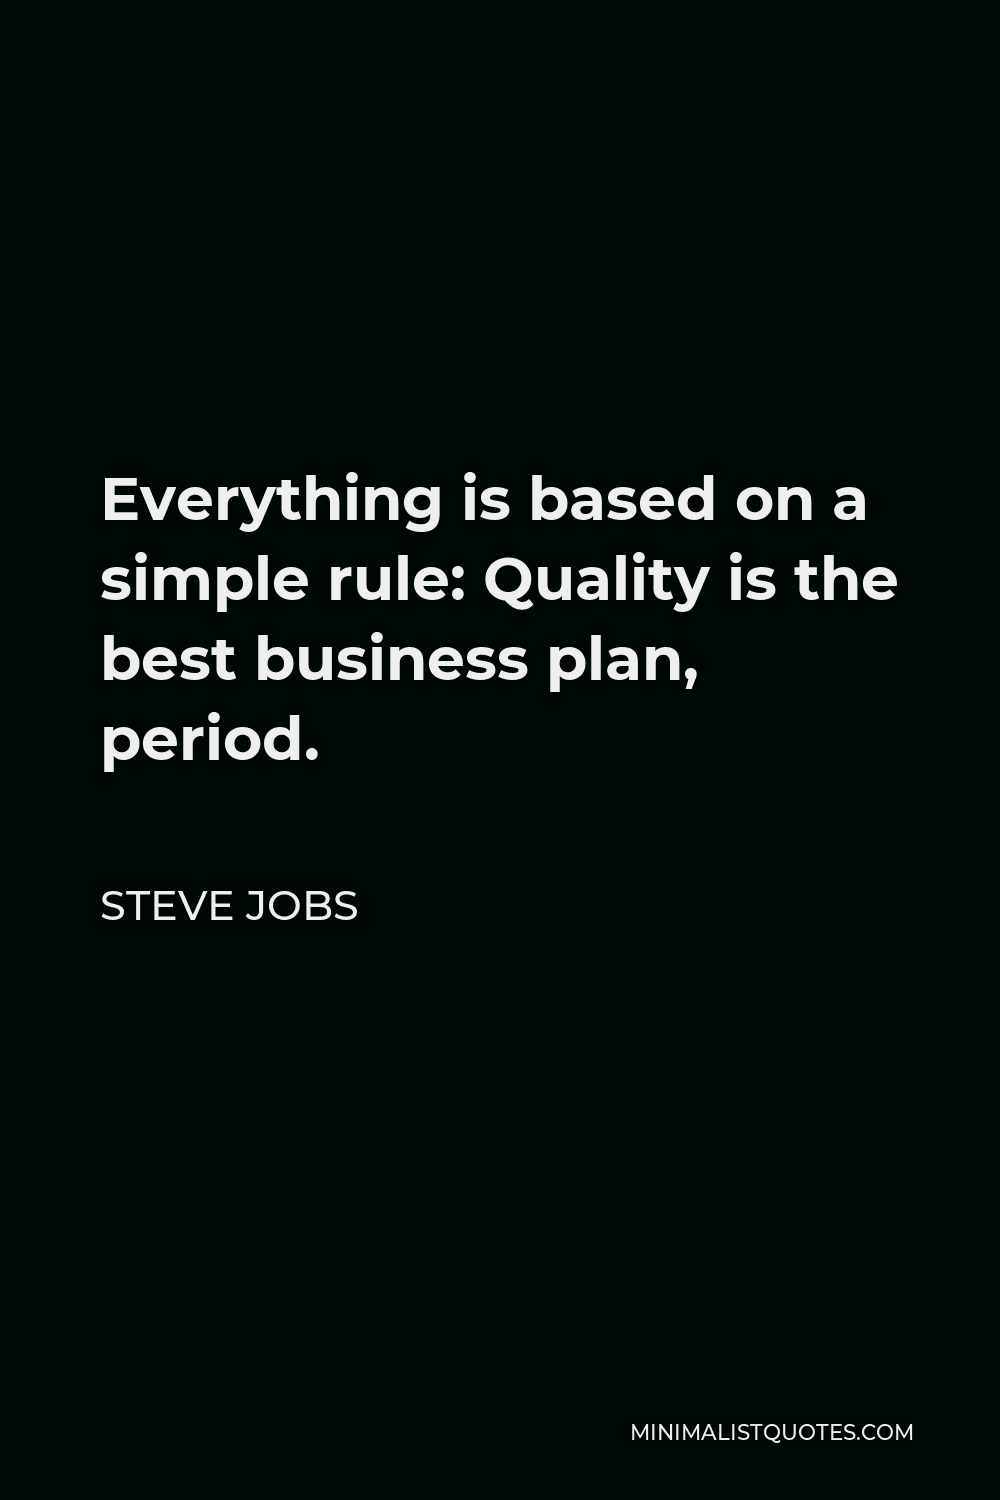 Steve Jobs Quote - Everything is based on a simple rule: Quality is the best business plan, period.